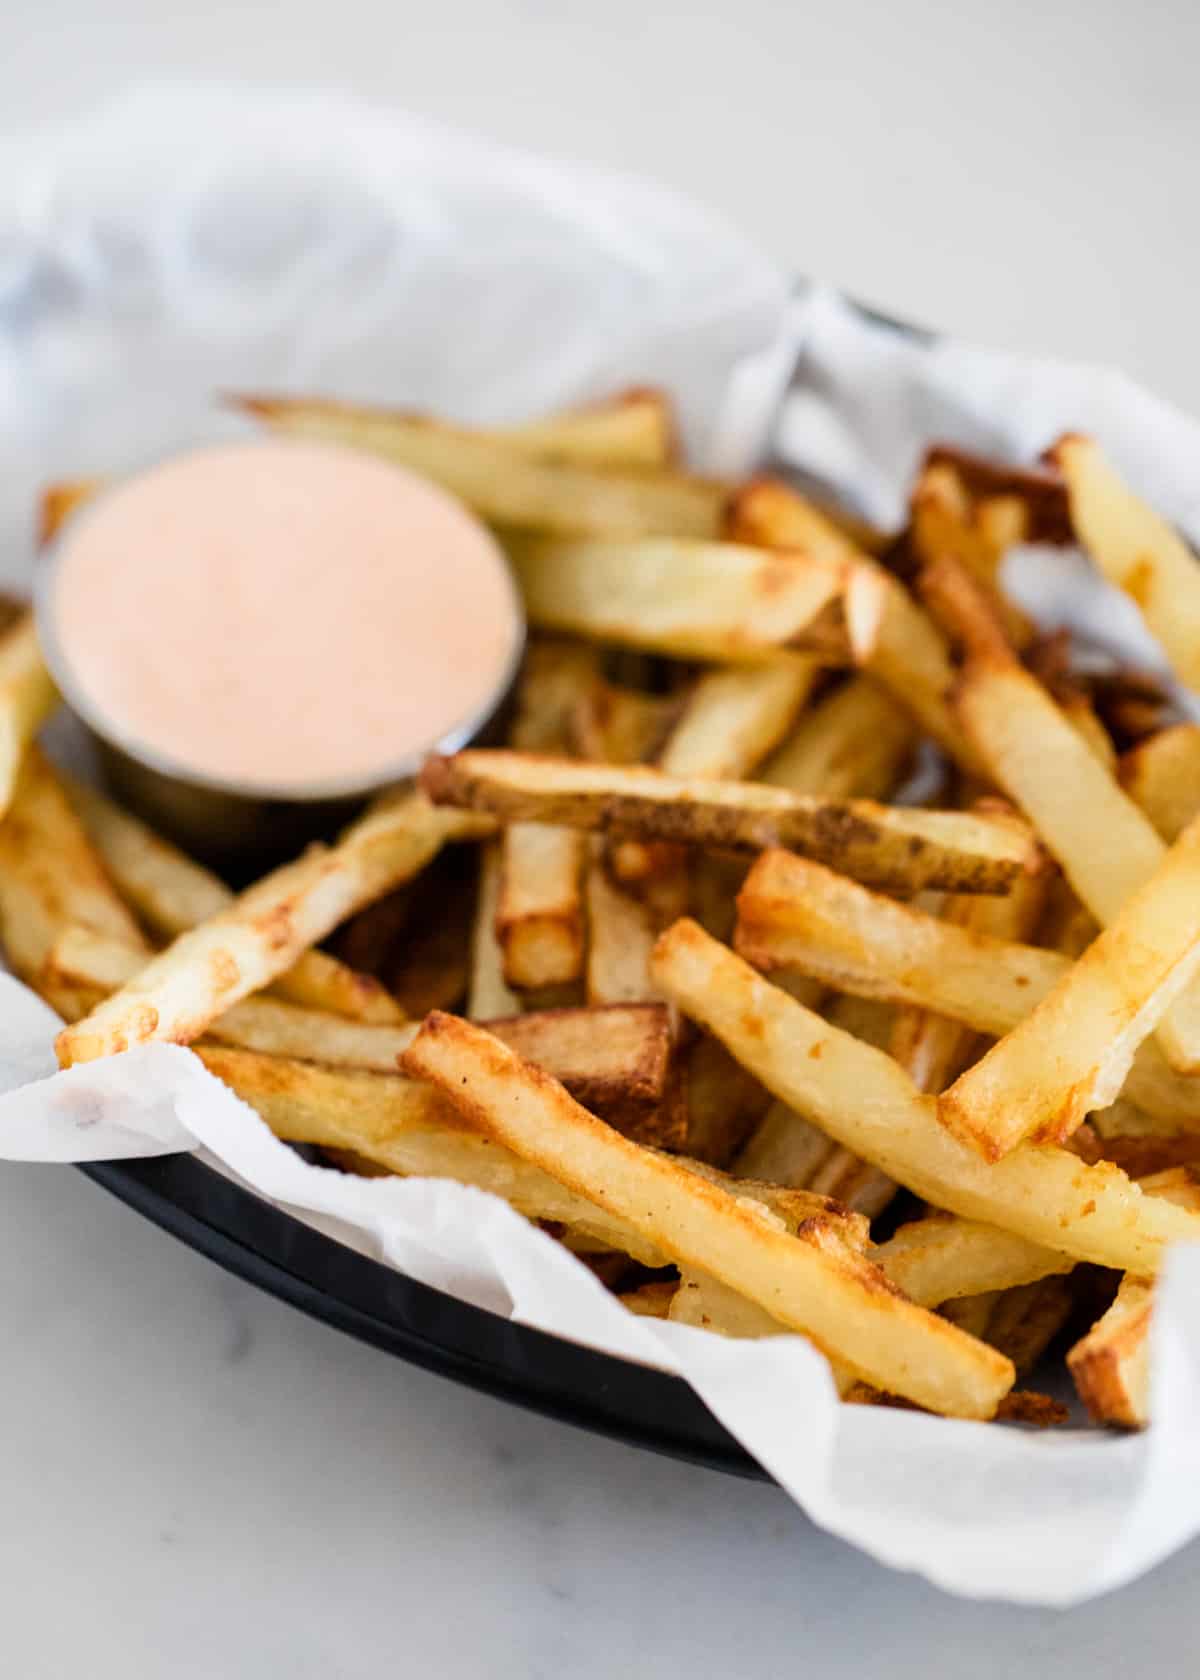 Homemade french fries in basket.